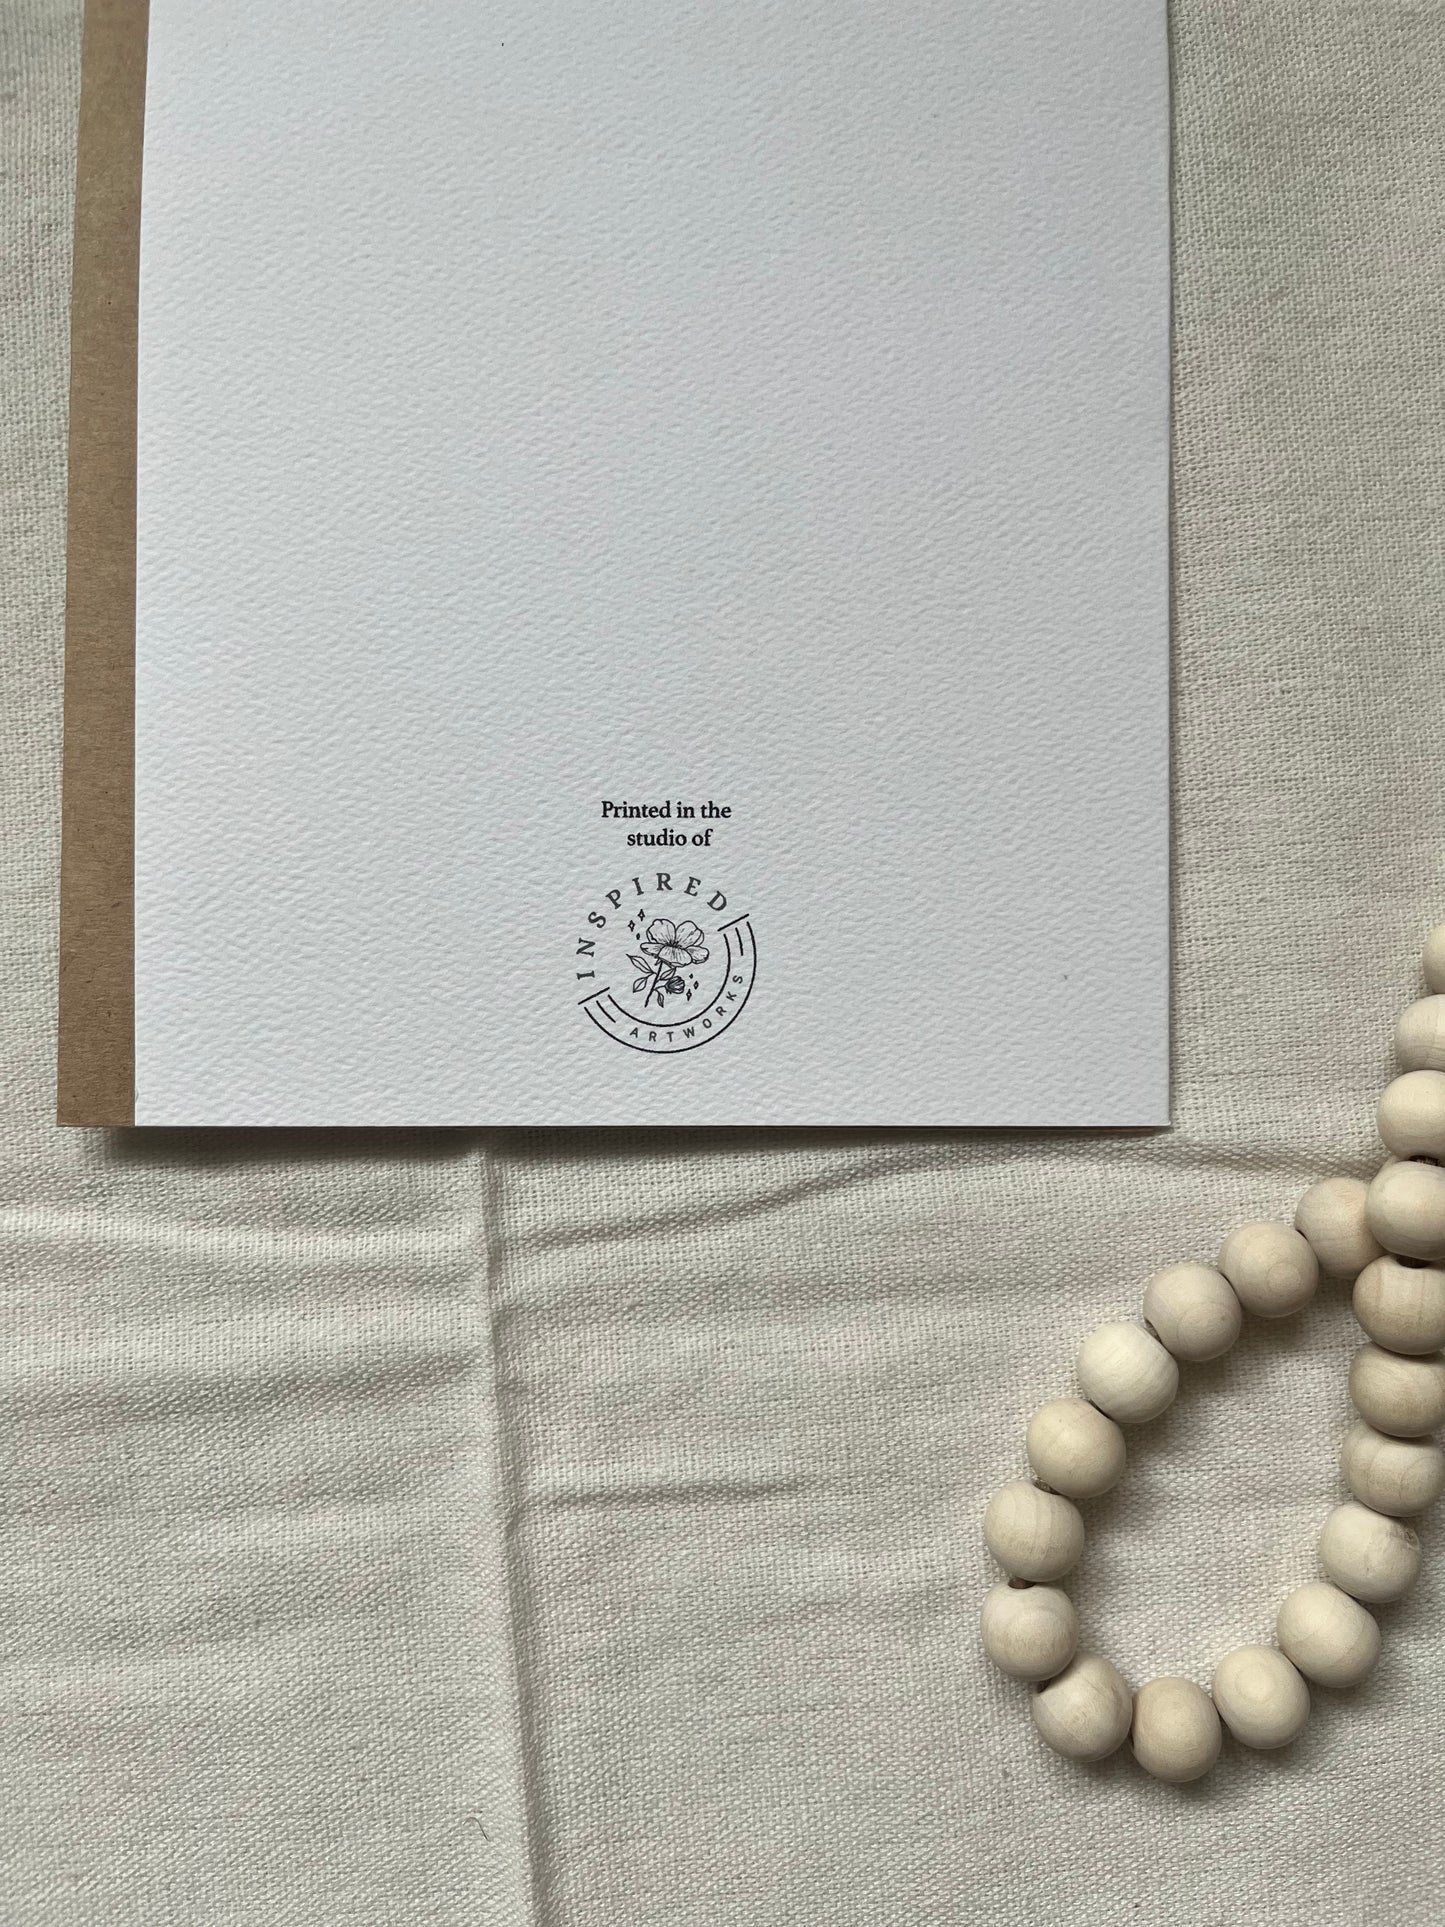 The Perfect Blend Wedding Card